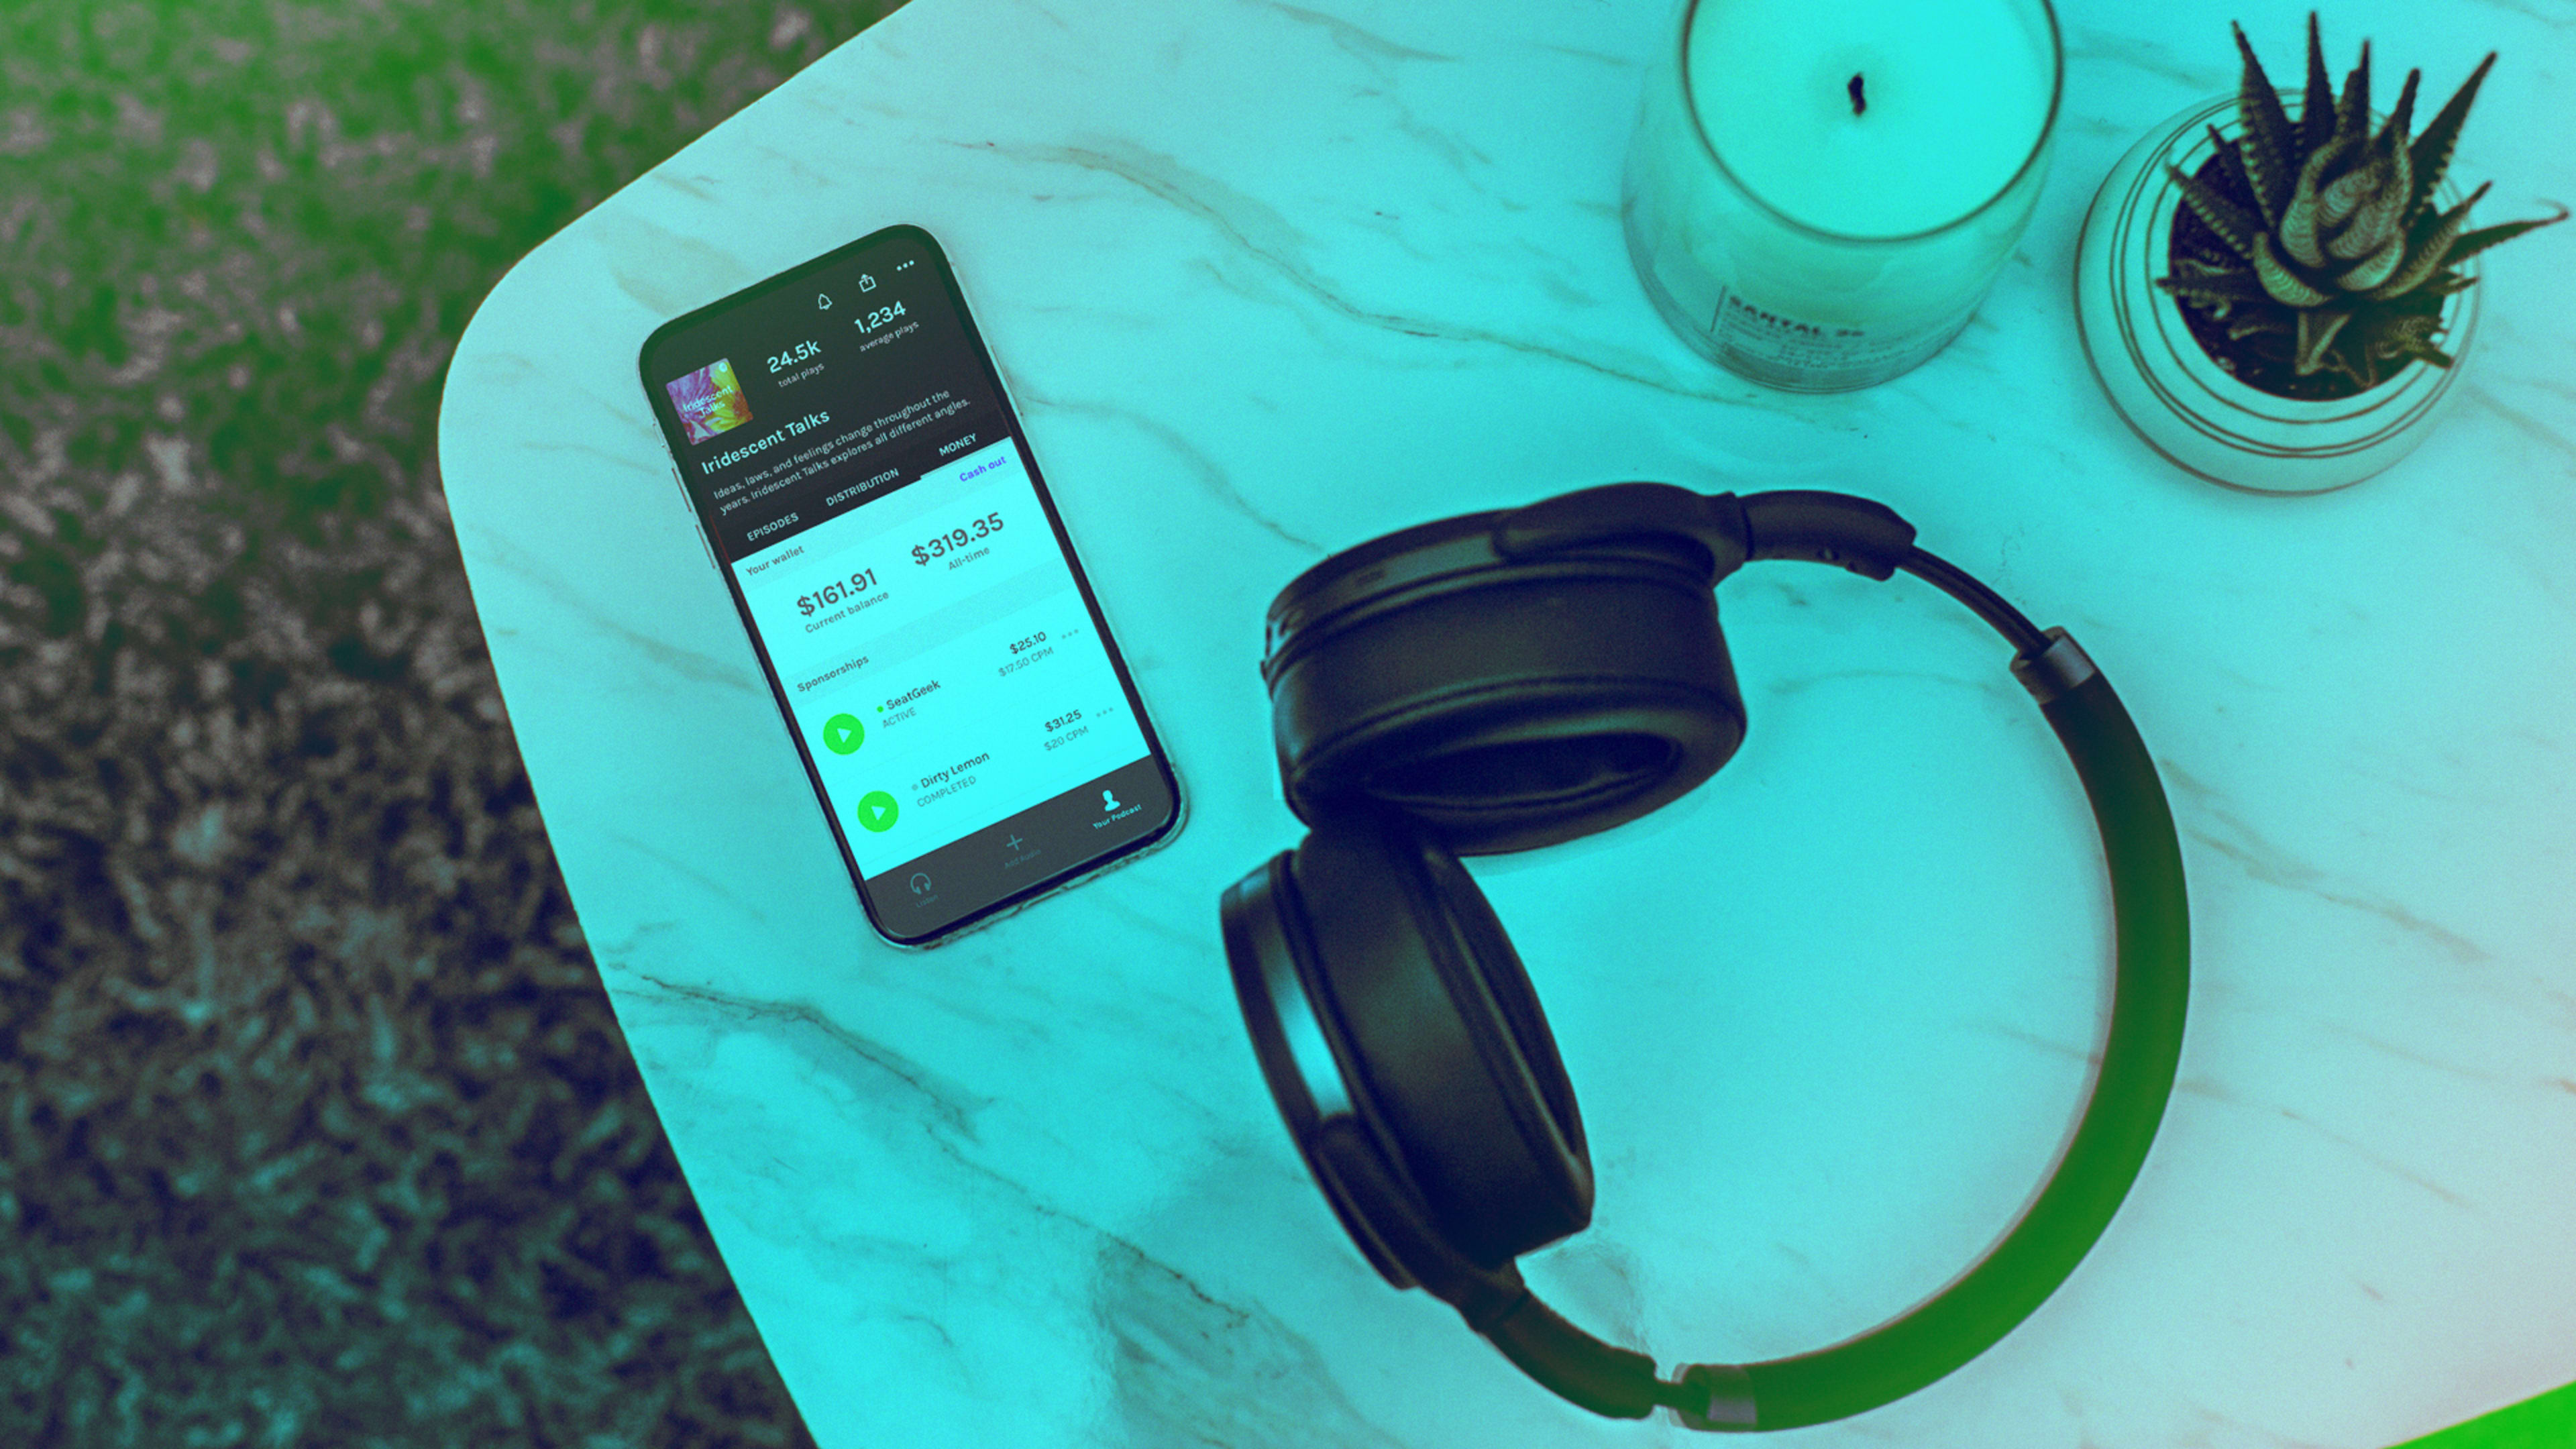 Anchor is Spotify’s best bet to beat Apple for control of your ears